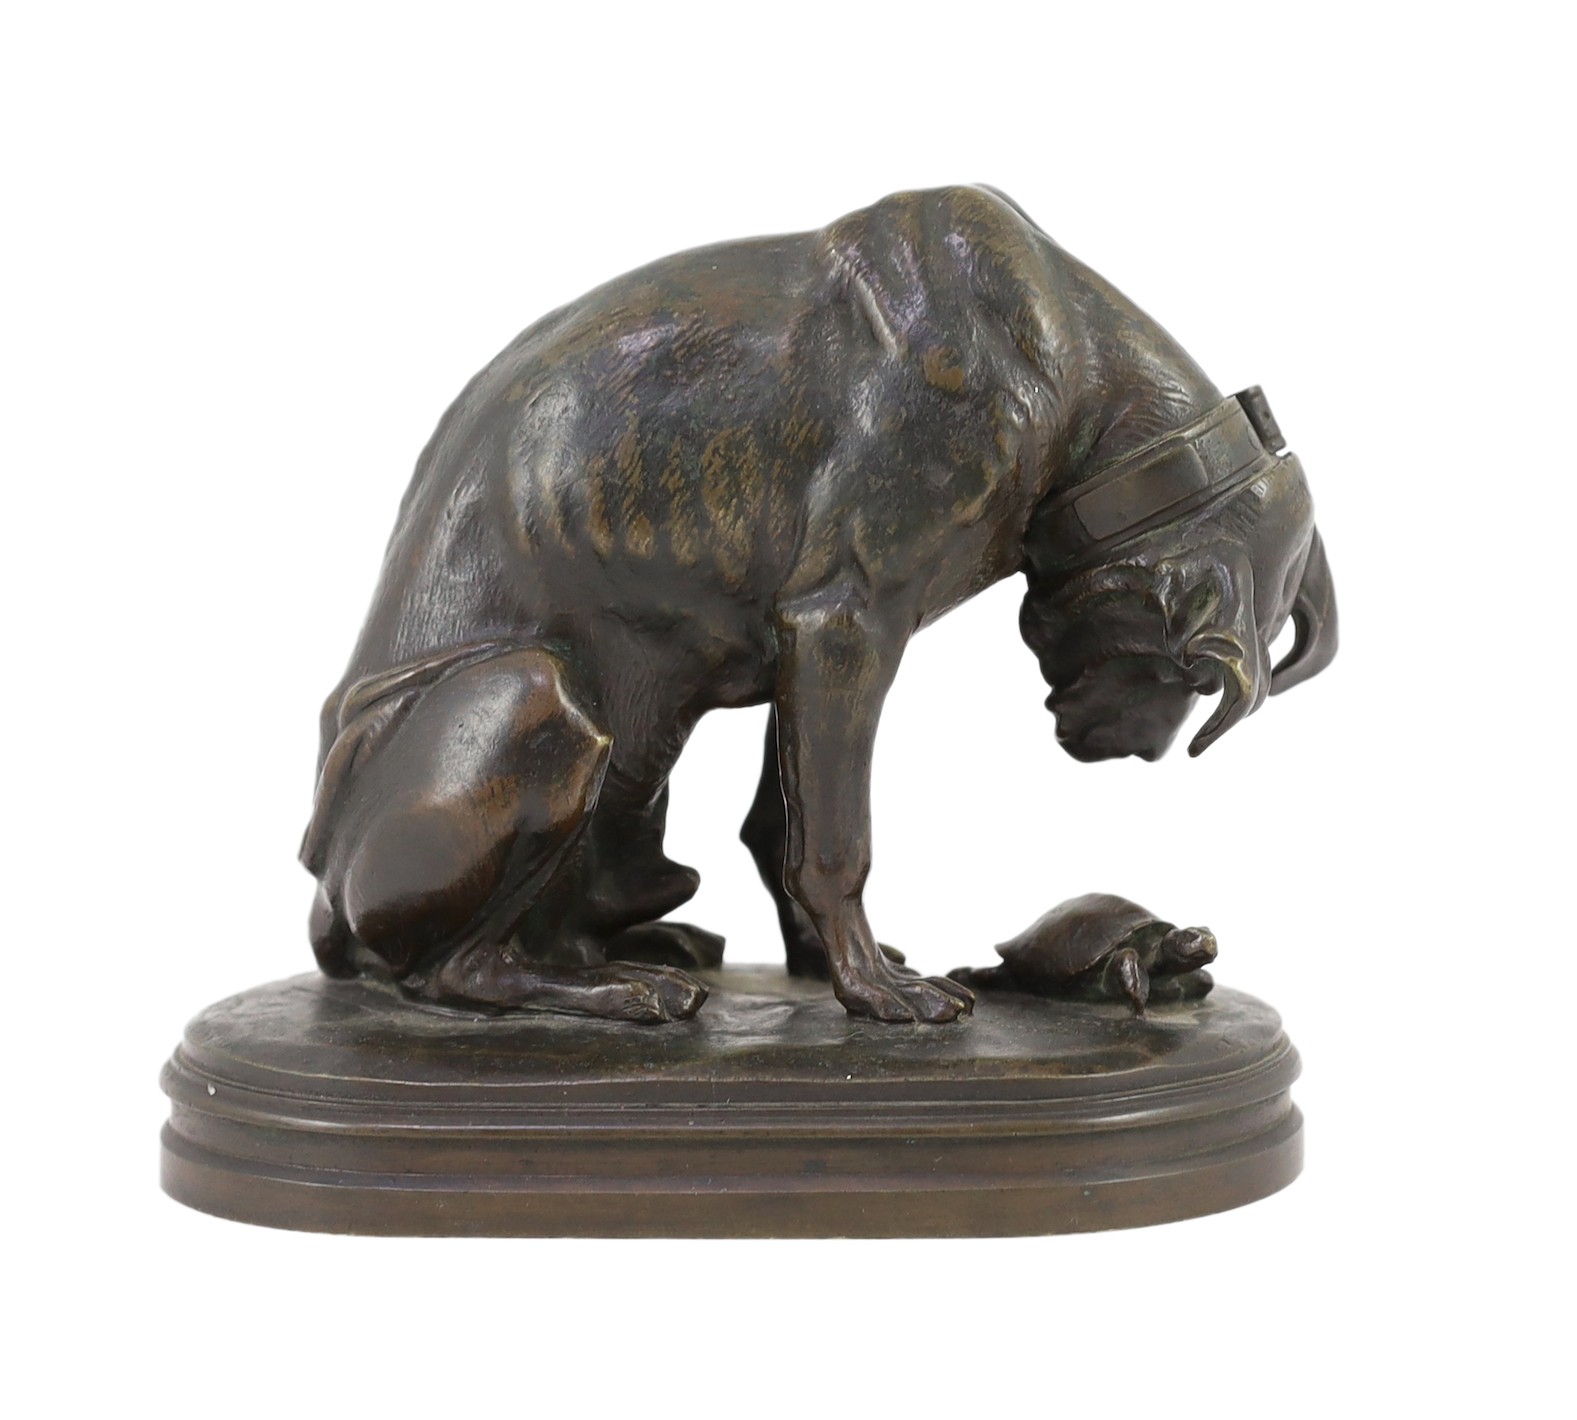 Henri-Alfred-Marie Jacquemart (French, 1824-1896). An animalier bronze group of a hound looking at a tortoise Width 18cm. Height 15cm.